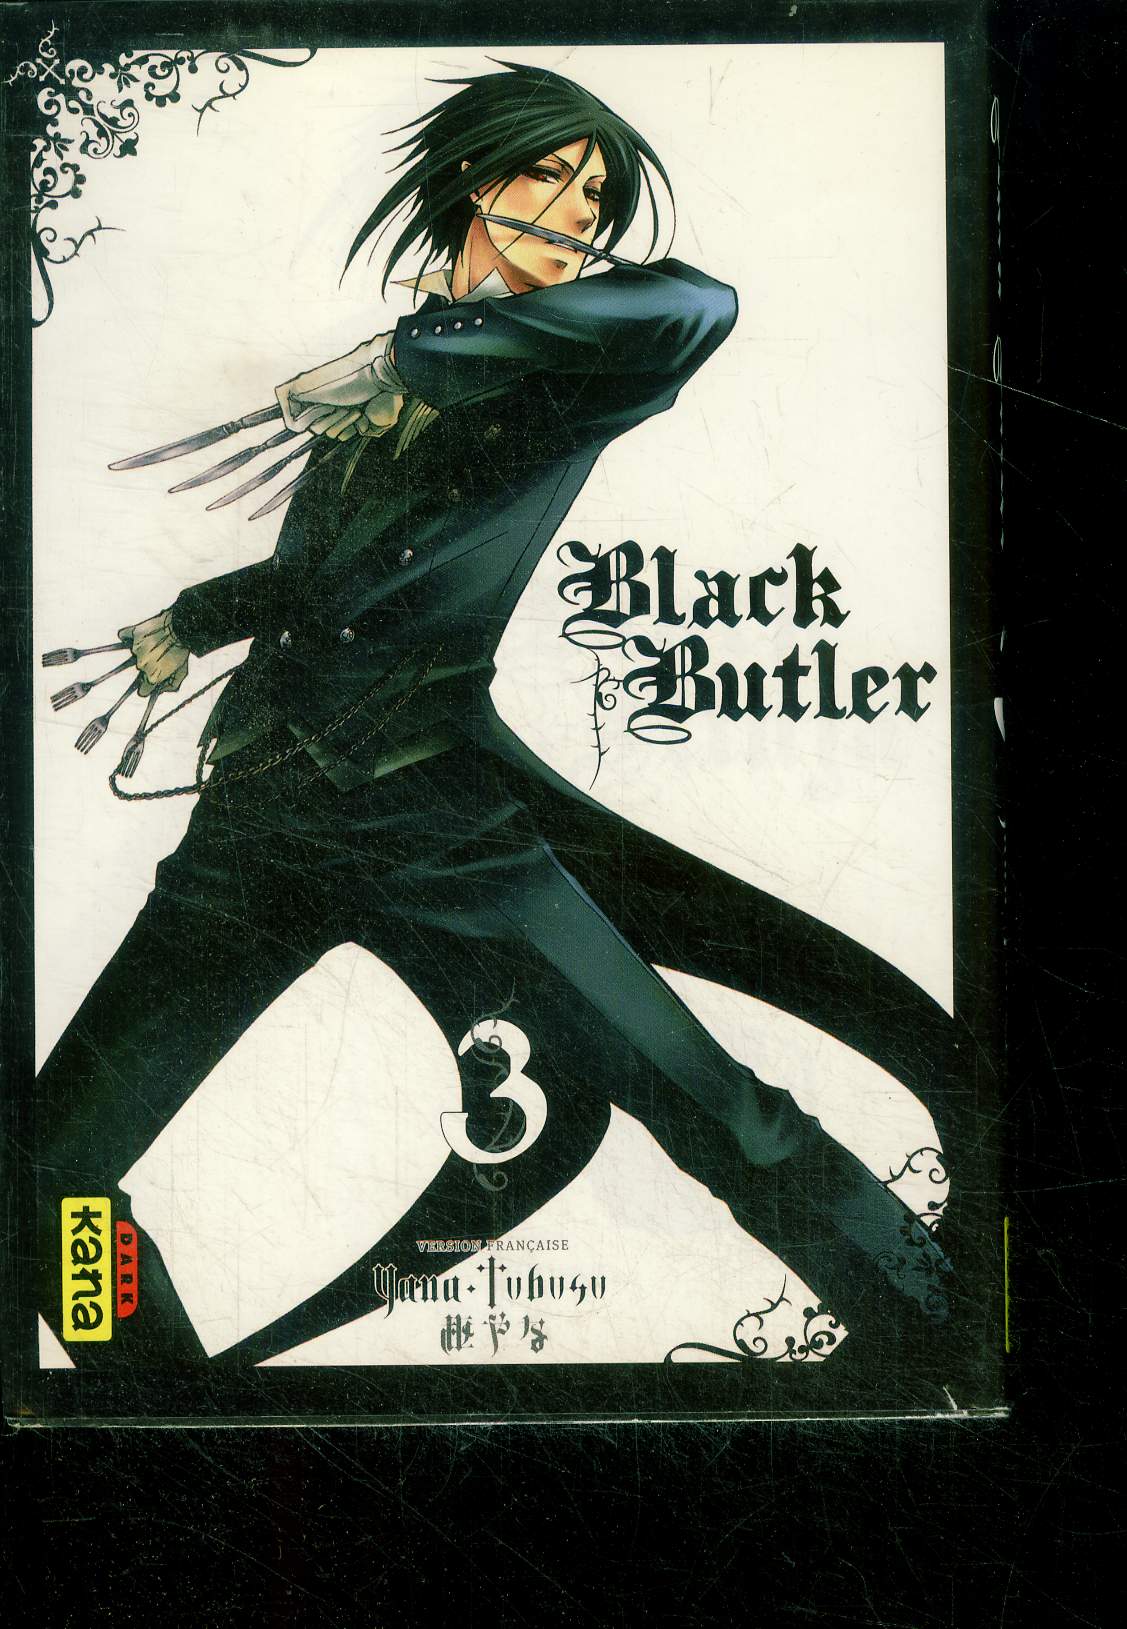 Black Butler - Tome 3, du chapitre 10  14 : in the morning, at noon, in the afternoon, at night, at midnight